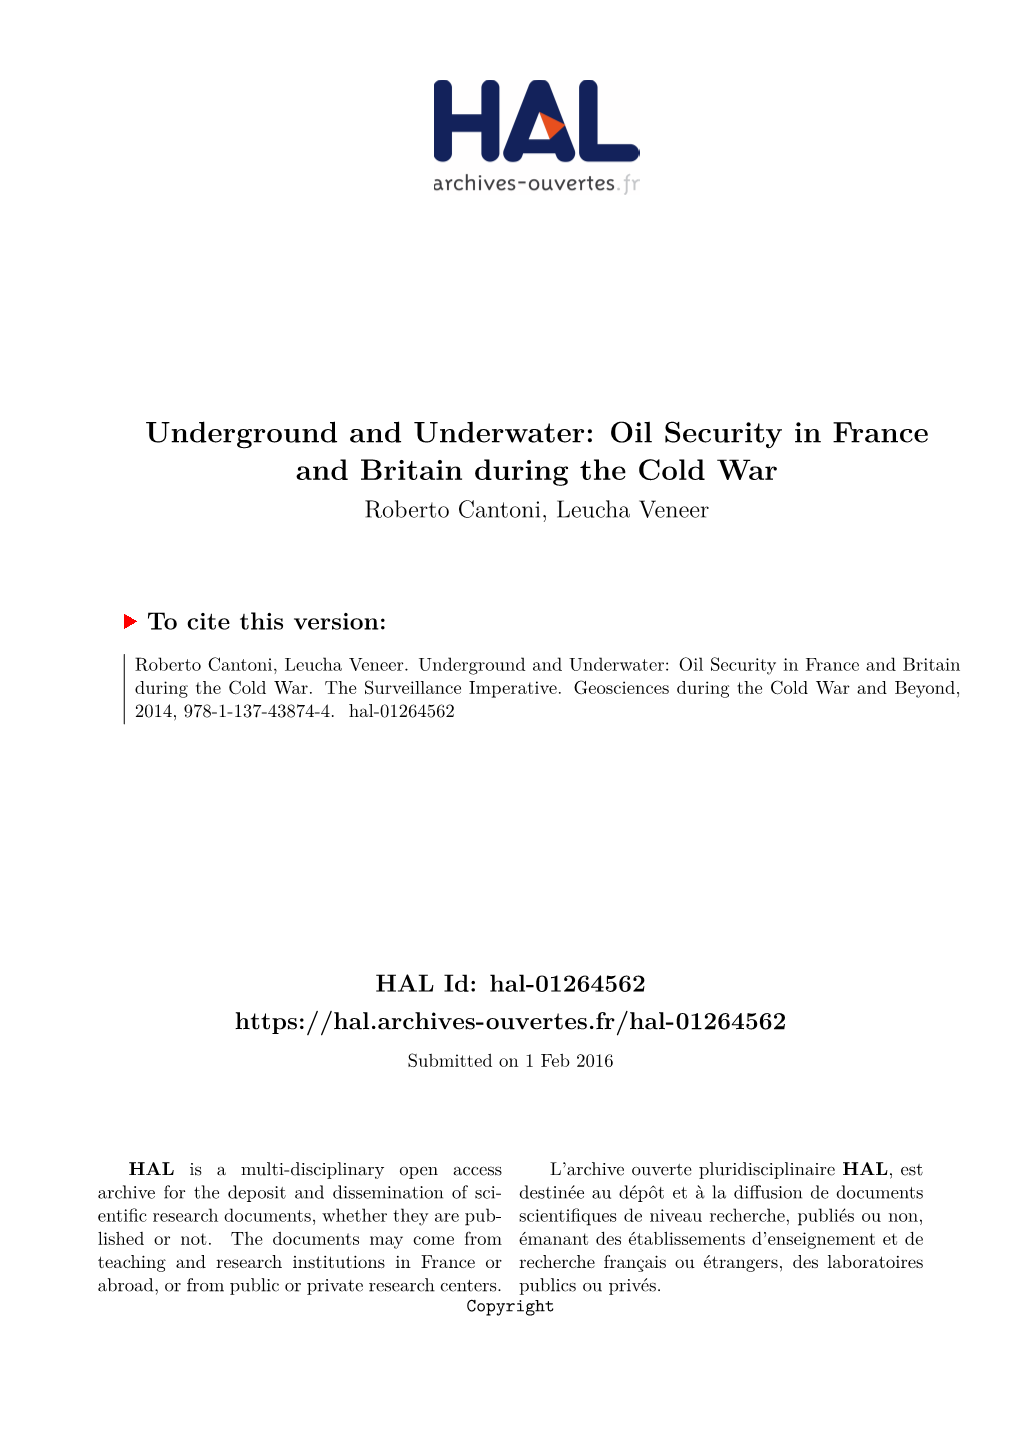 Oil Security in France and Britain During the Cold War Roberto Cantoni, Leucha Veneer